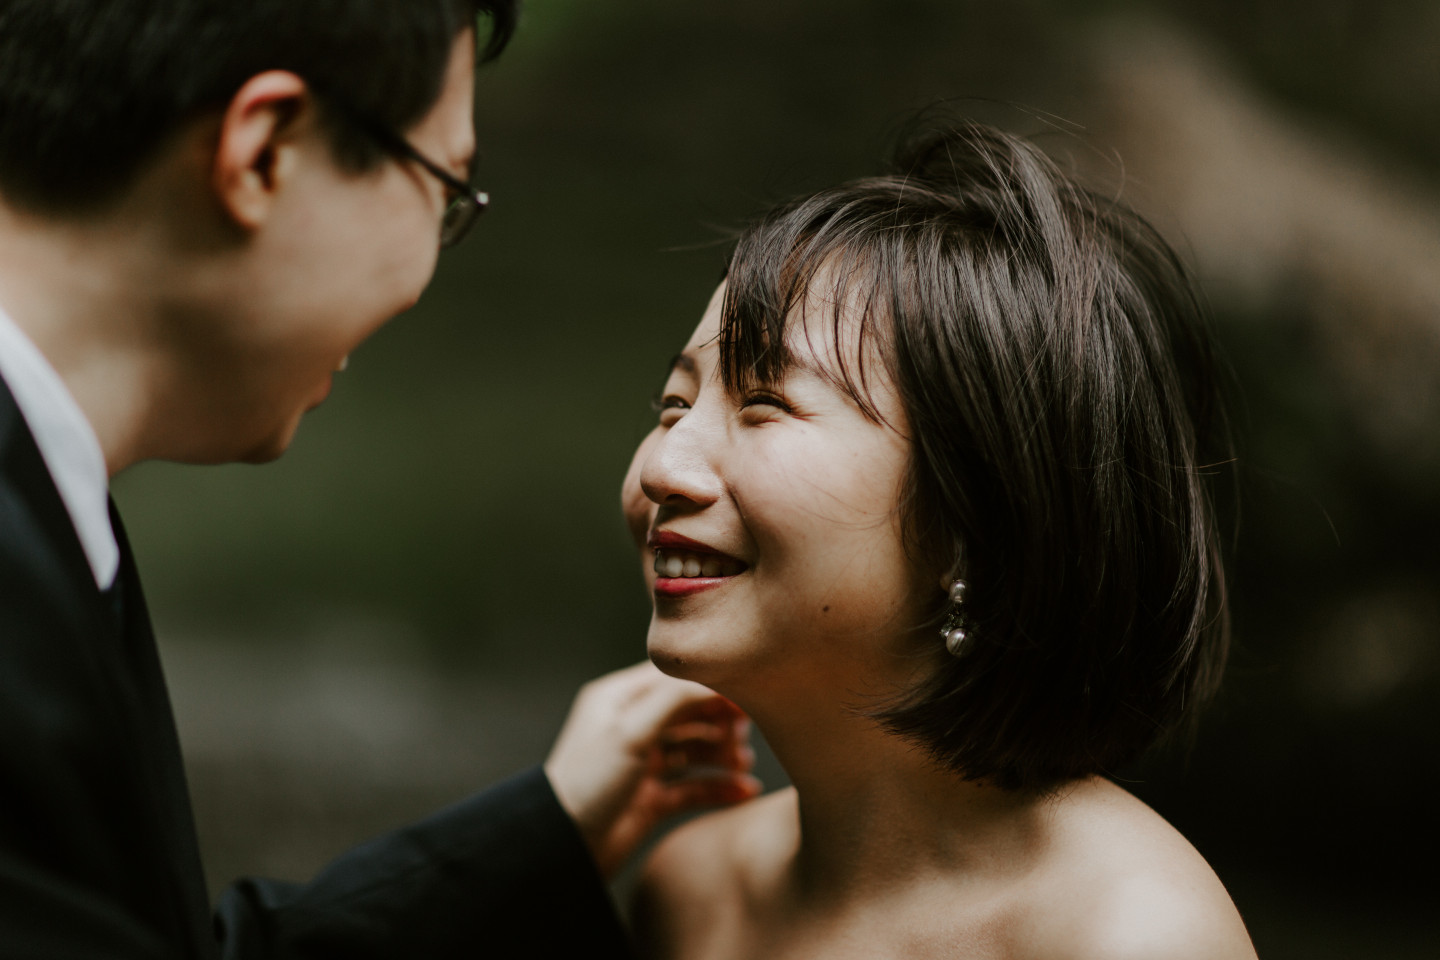 Valerie smiles at Alex. Elopement wedding photography at Mount Hood by Sienna Plus Josh.